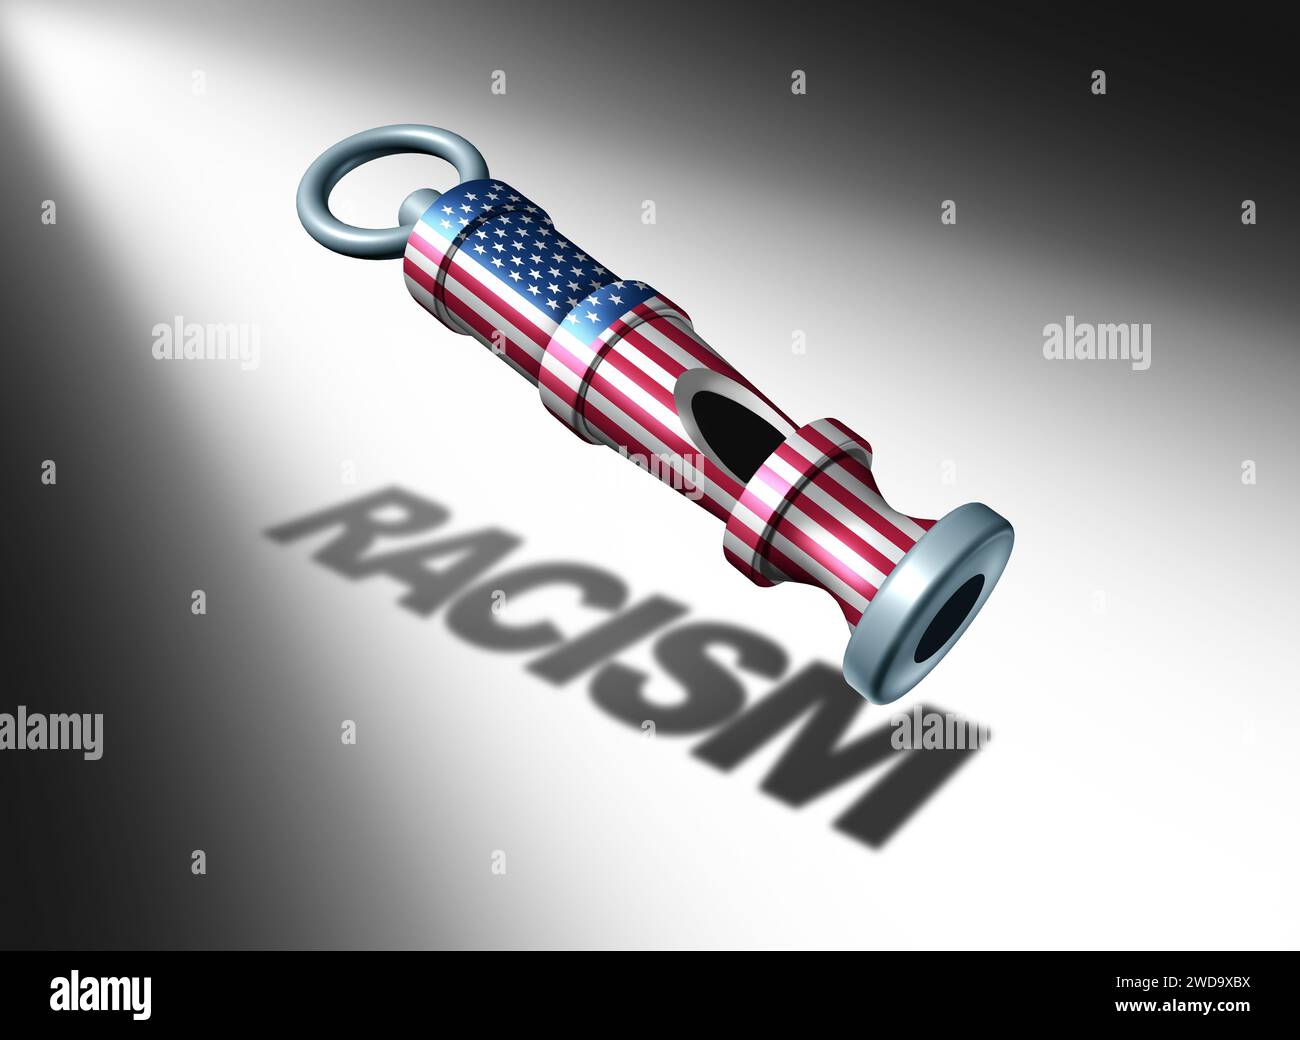 US Dog Whistle Racist Politics and American Racism Symbol as coded politician language communicating hidden racist ideas of intolerance Stock Photo